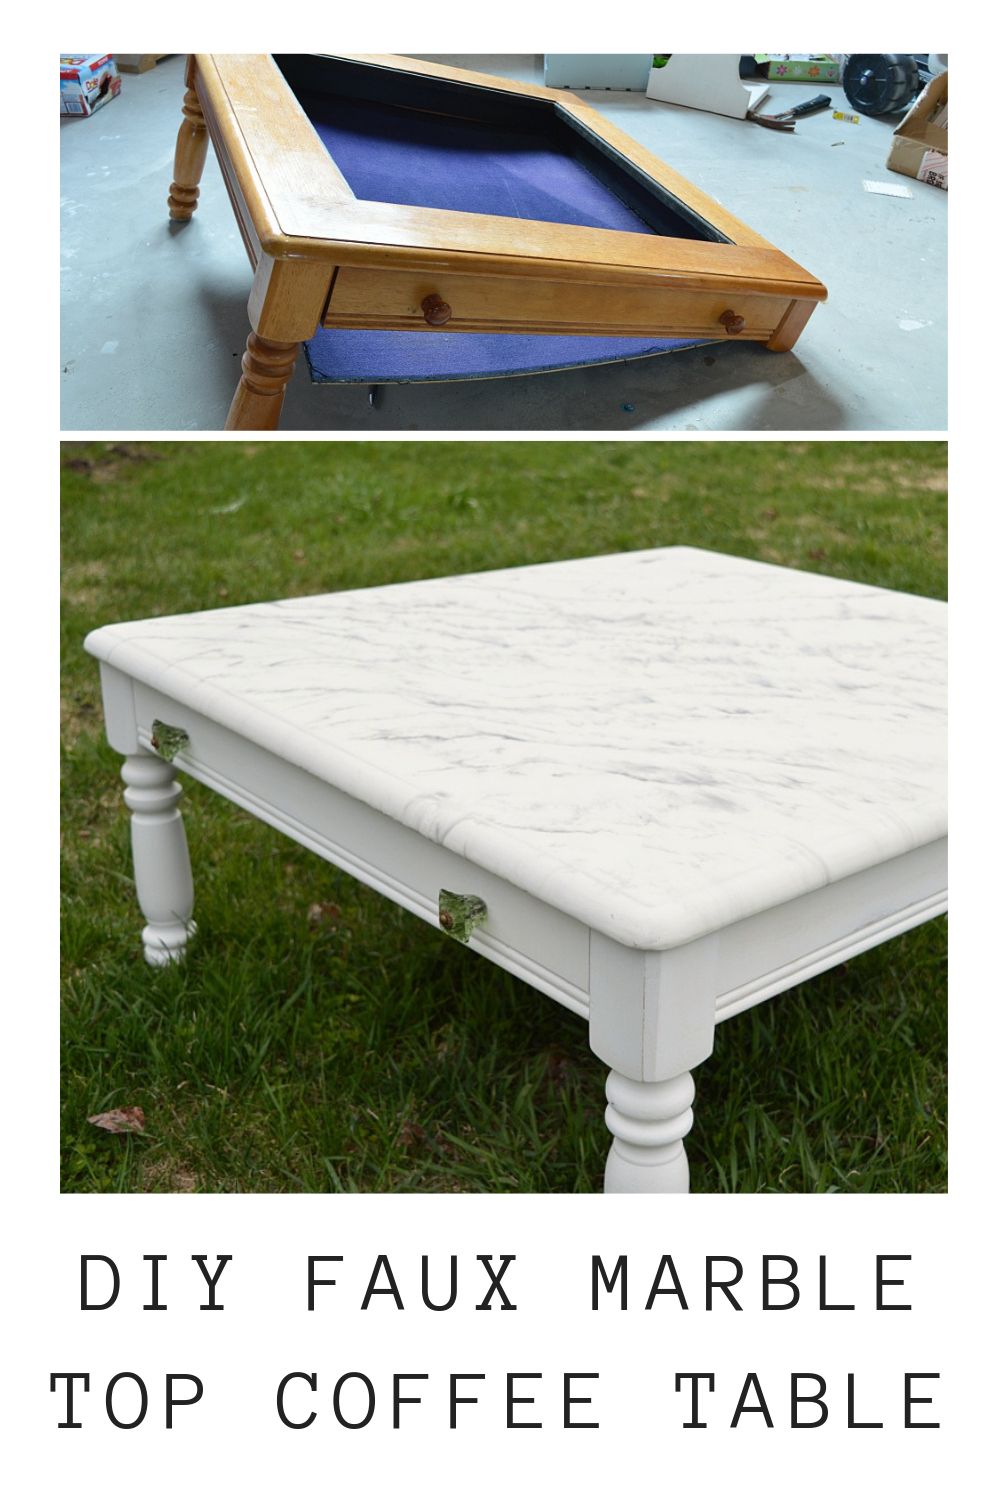 How To Make A Faux Marble Top Coffee Table – The Vanderveen House Inside Faux Marble Top Coffee Tables (View 15 of 15)